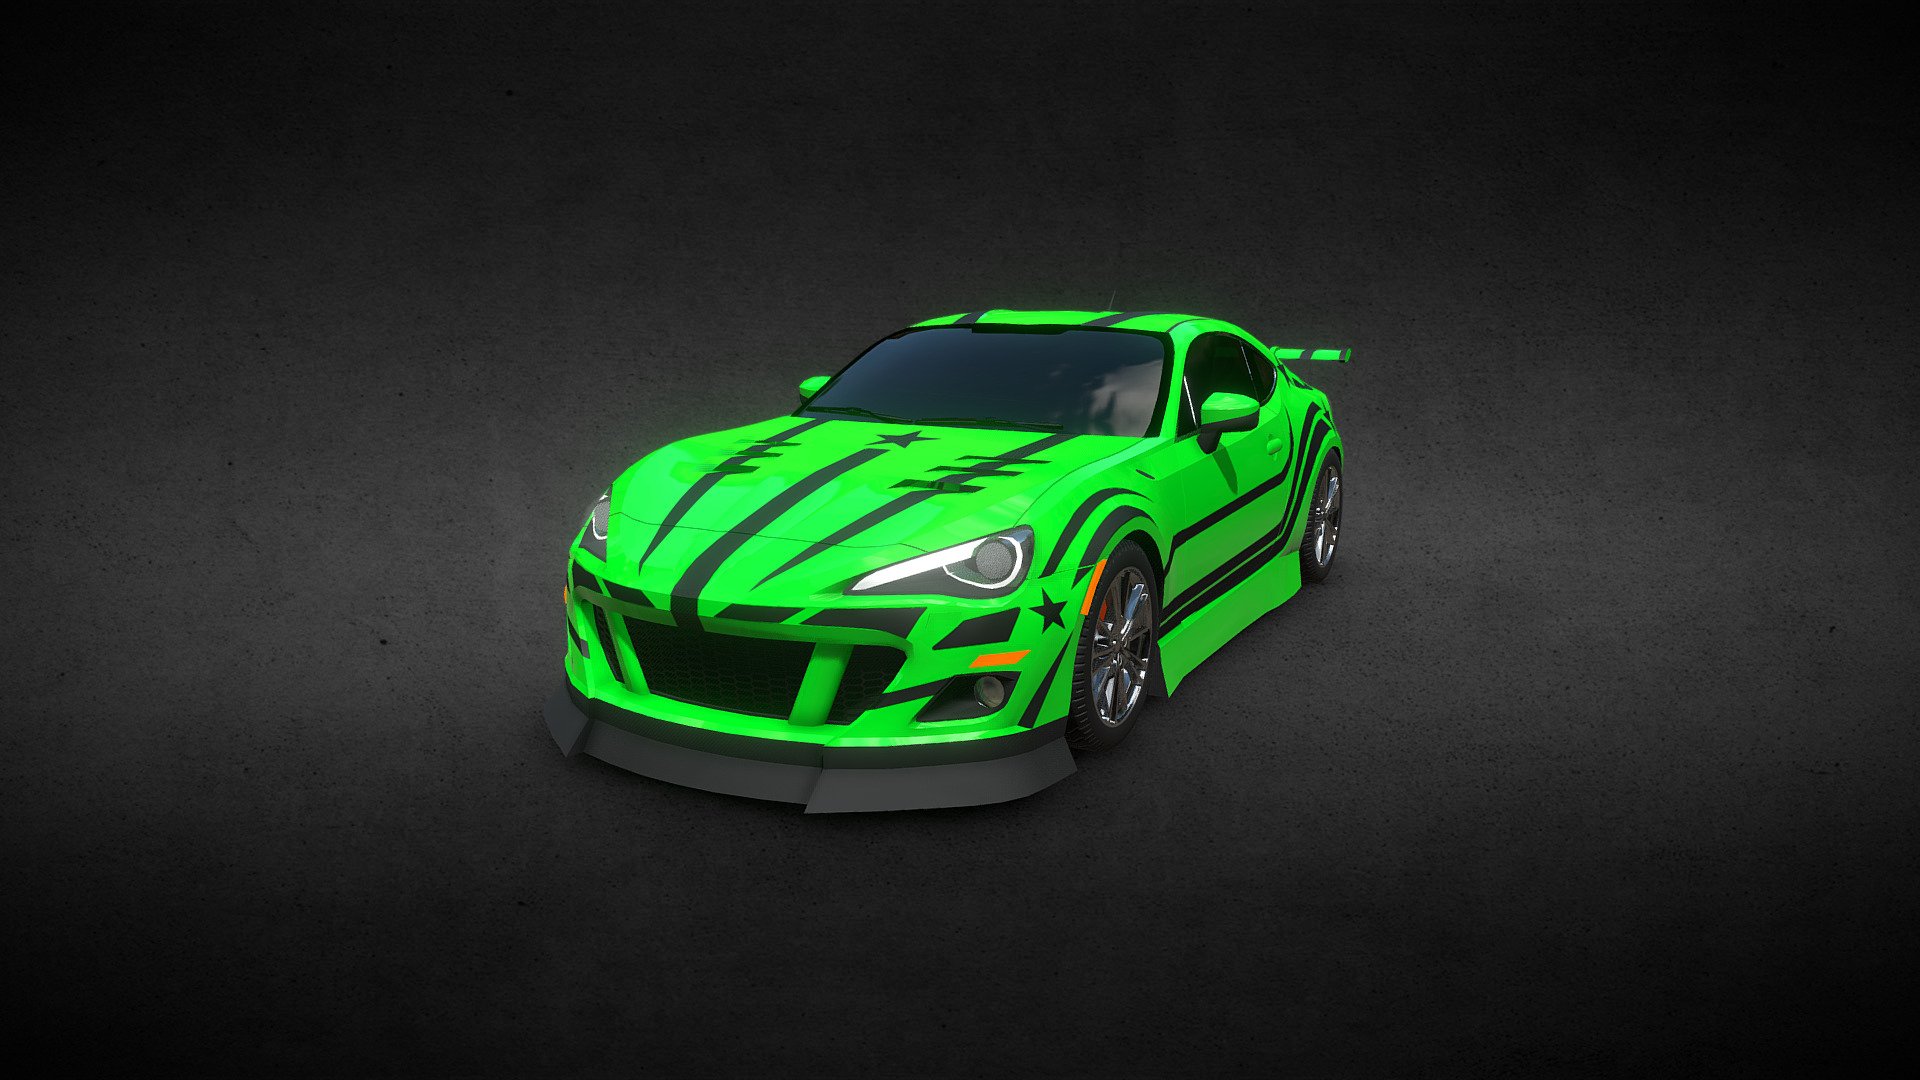 A tuned car - Sport car 20, downloaded from unity asset store.

I hope you'd like it :) - Car tuning - Sport Car 20 - 3D model by KrStolorz (Krzysztof Stolorz) (@KrStolorz) 3d model